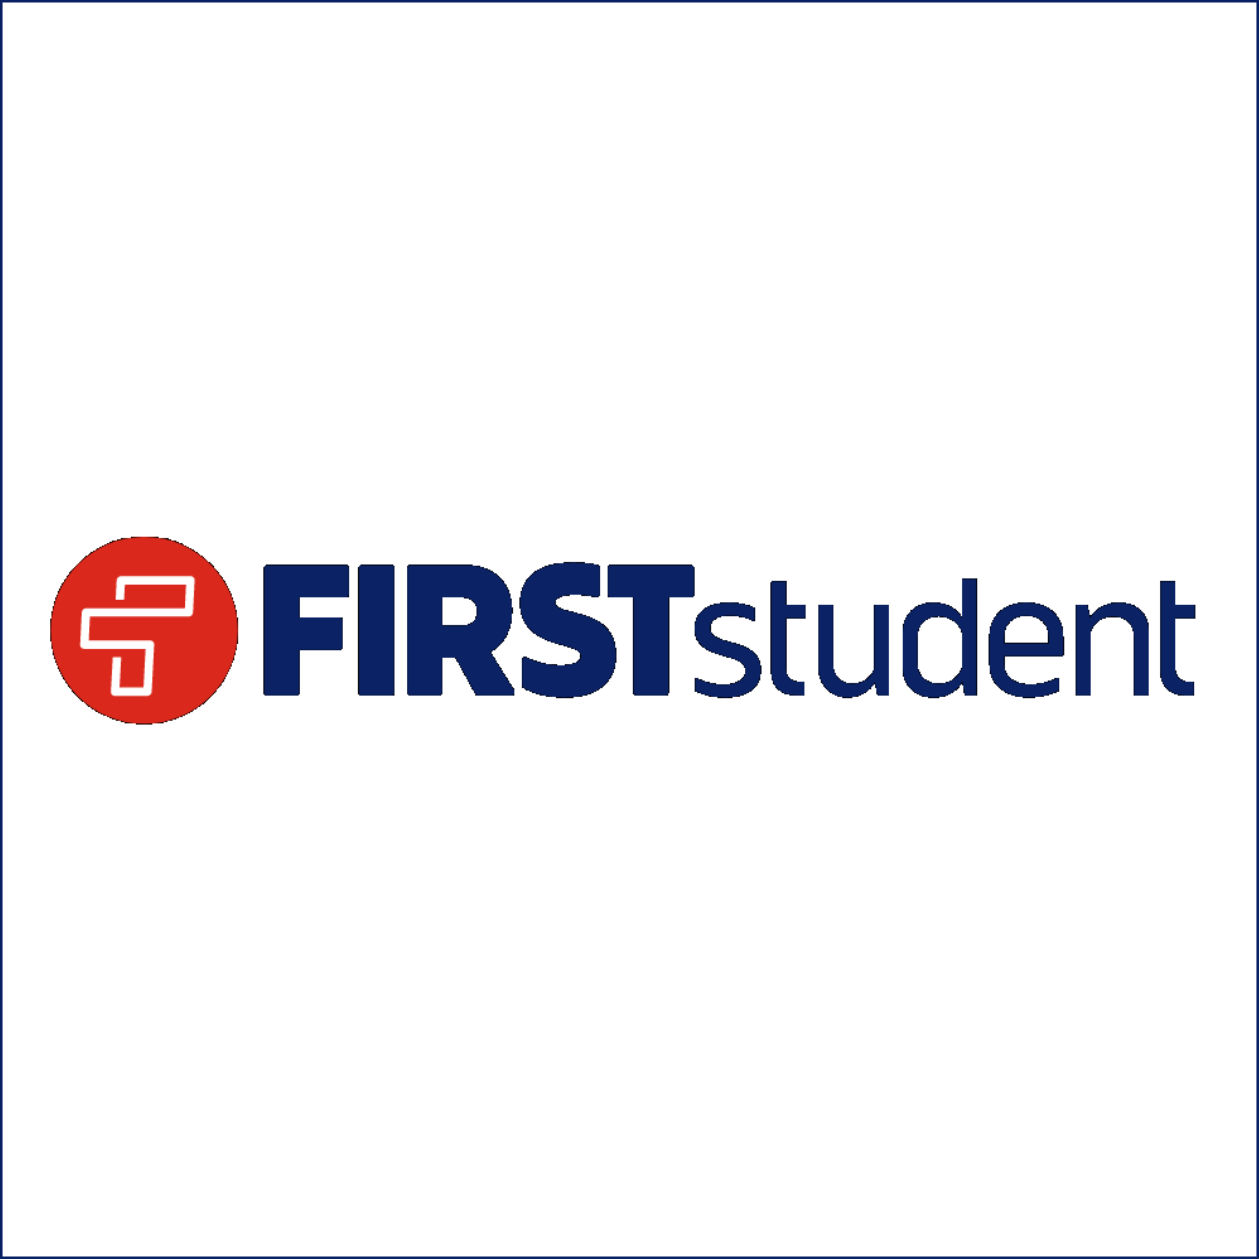 FIRSTstudent